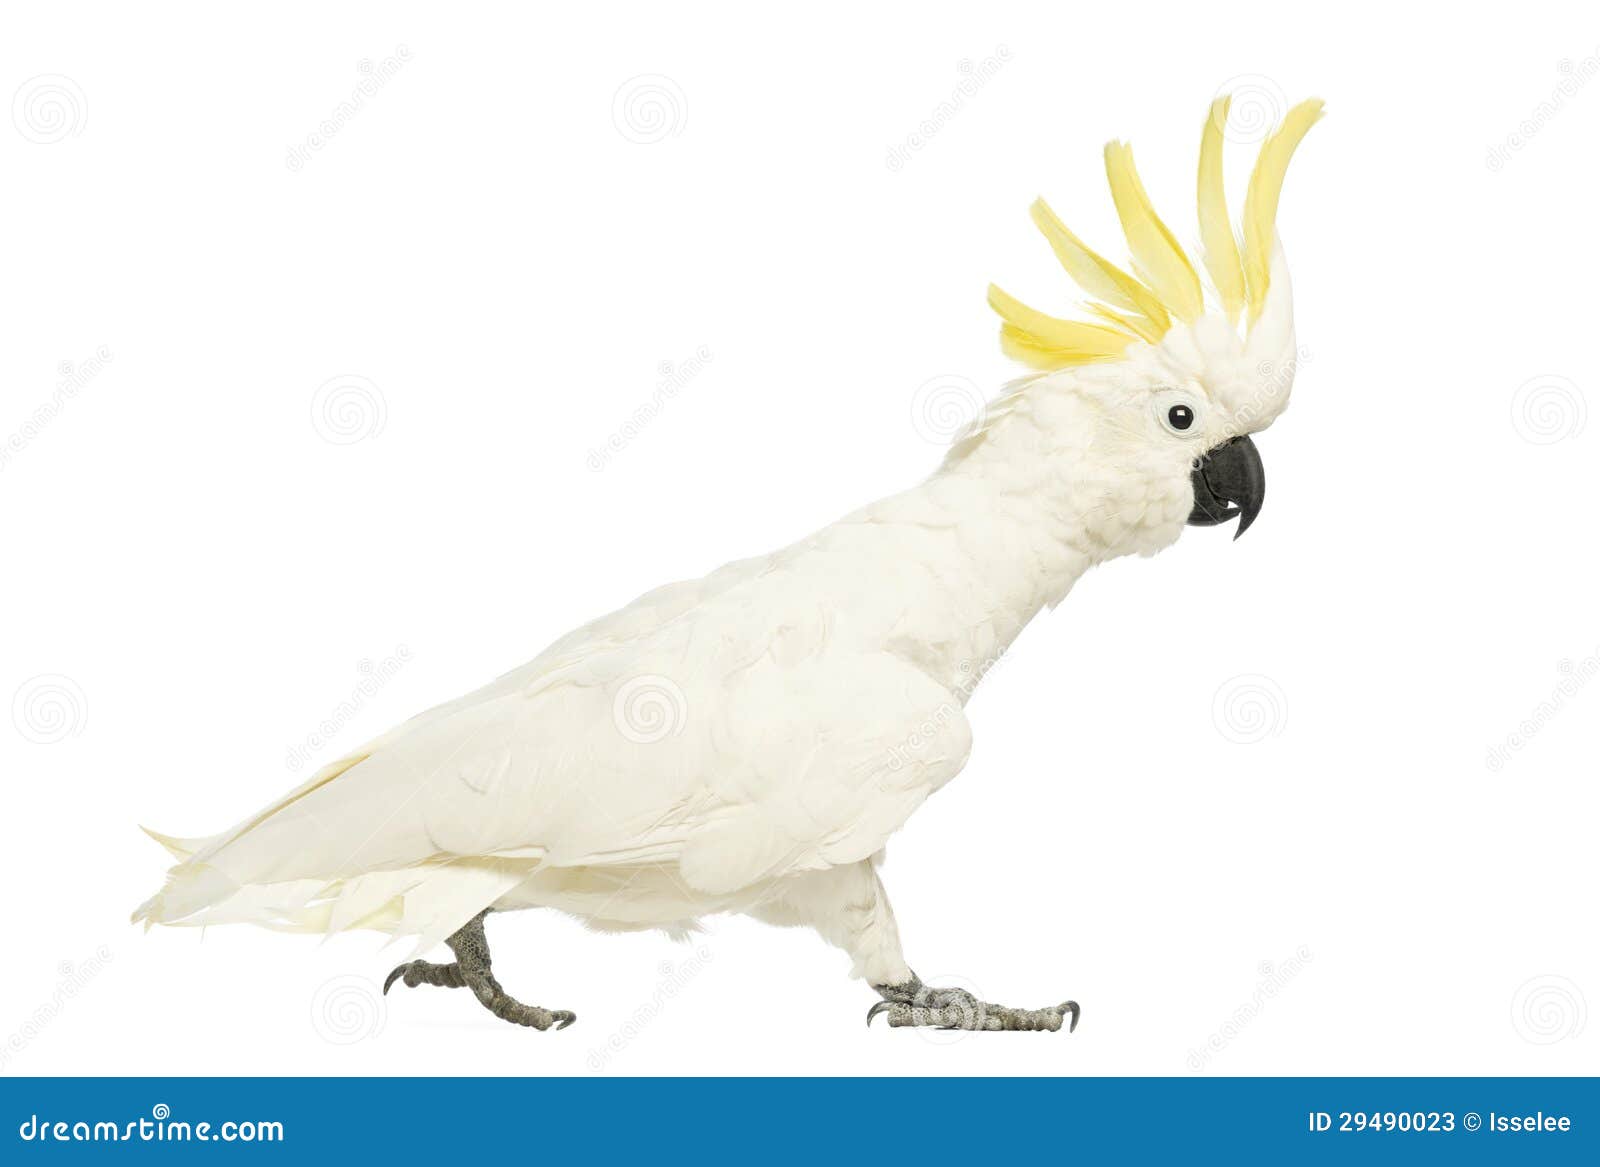 sulphur-crested cockatoo, cacatua galerita, 30 years old, walking with crest up